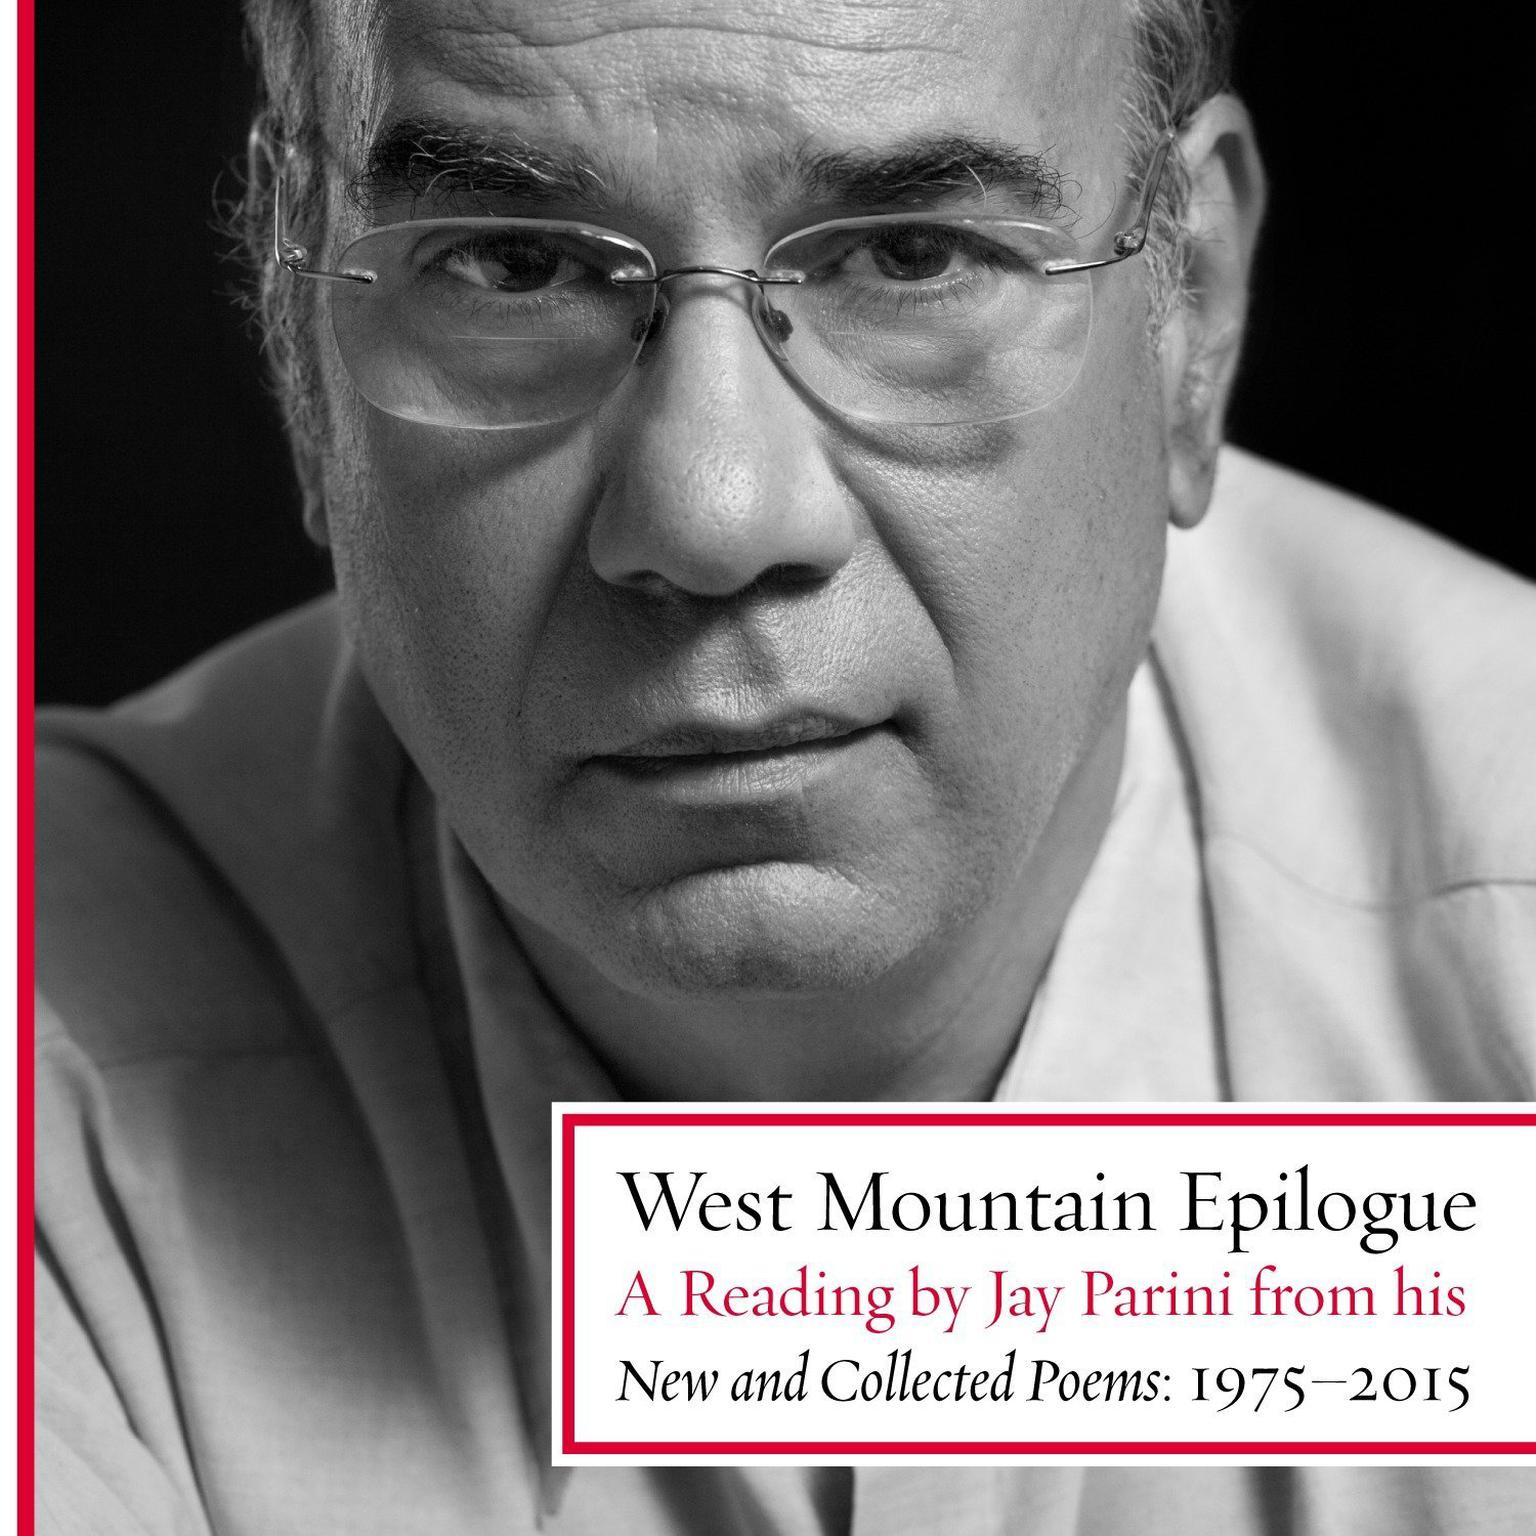 West Mountain Epilogue (Abridged): A Reading by Jay Parini from his New and Collected Poems: 1975-2015 Audiobook, by Jay Parini